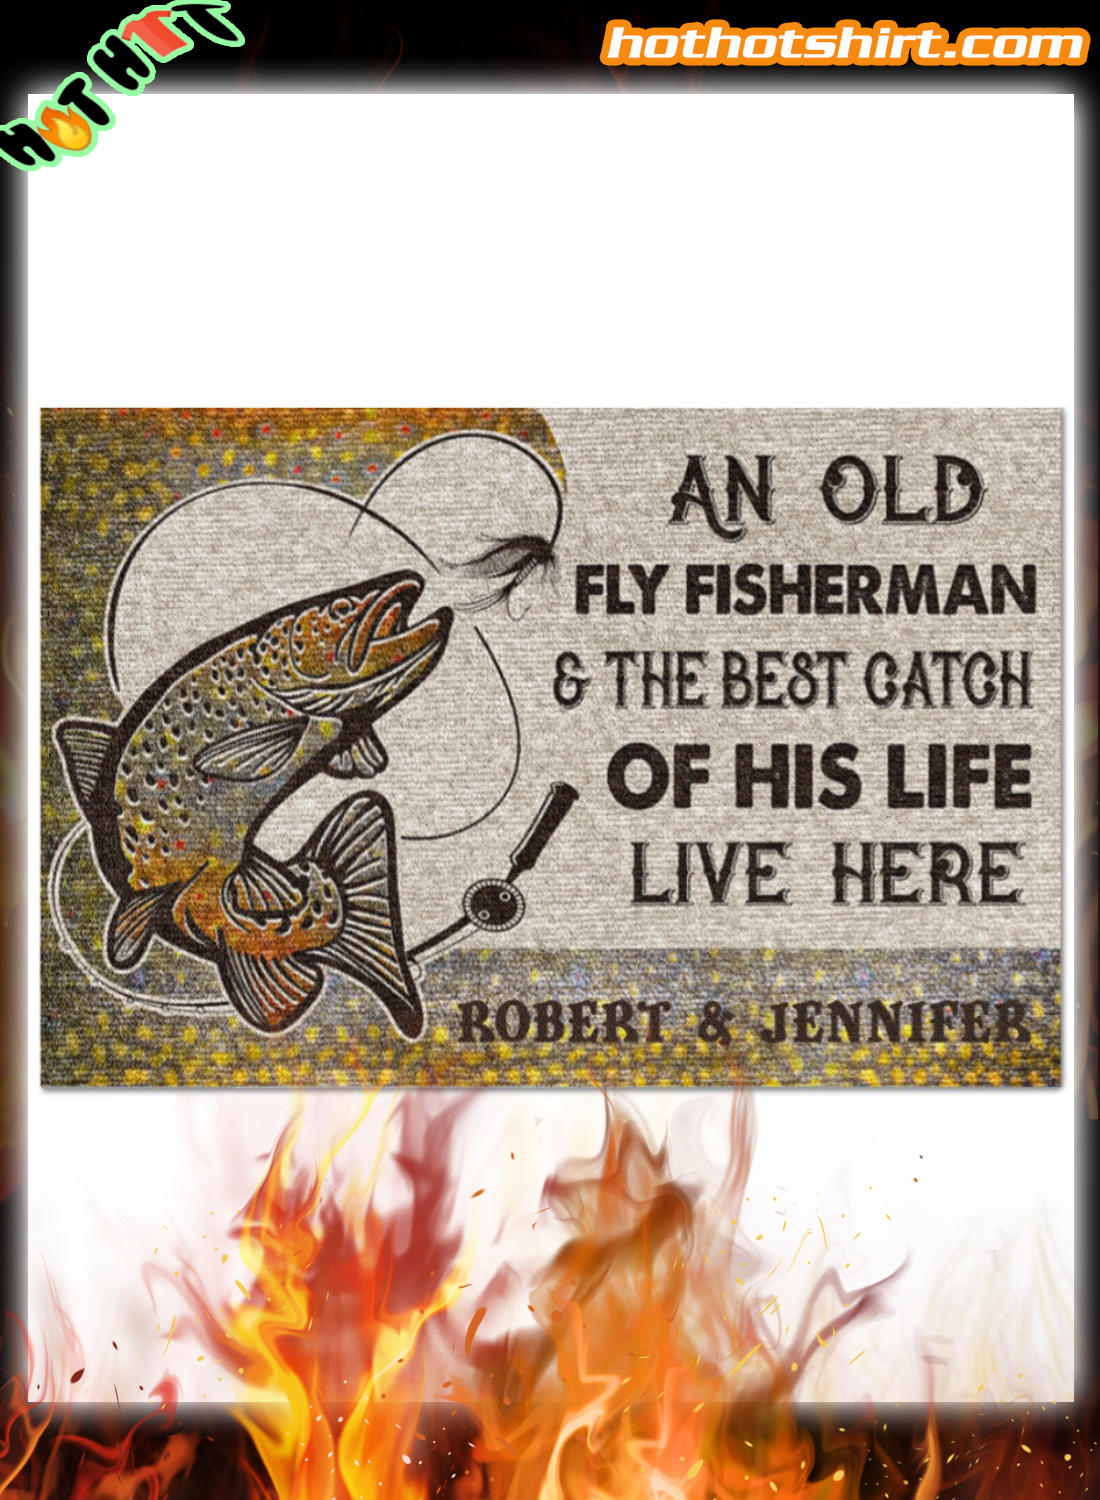 Personalized An old fly fisherman and the best catch of his live live here doormat